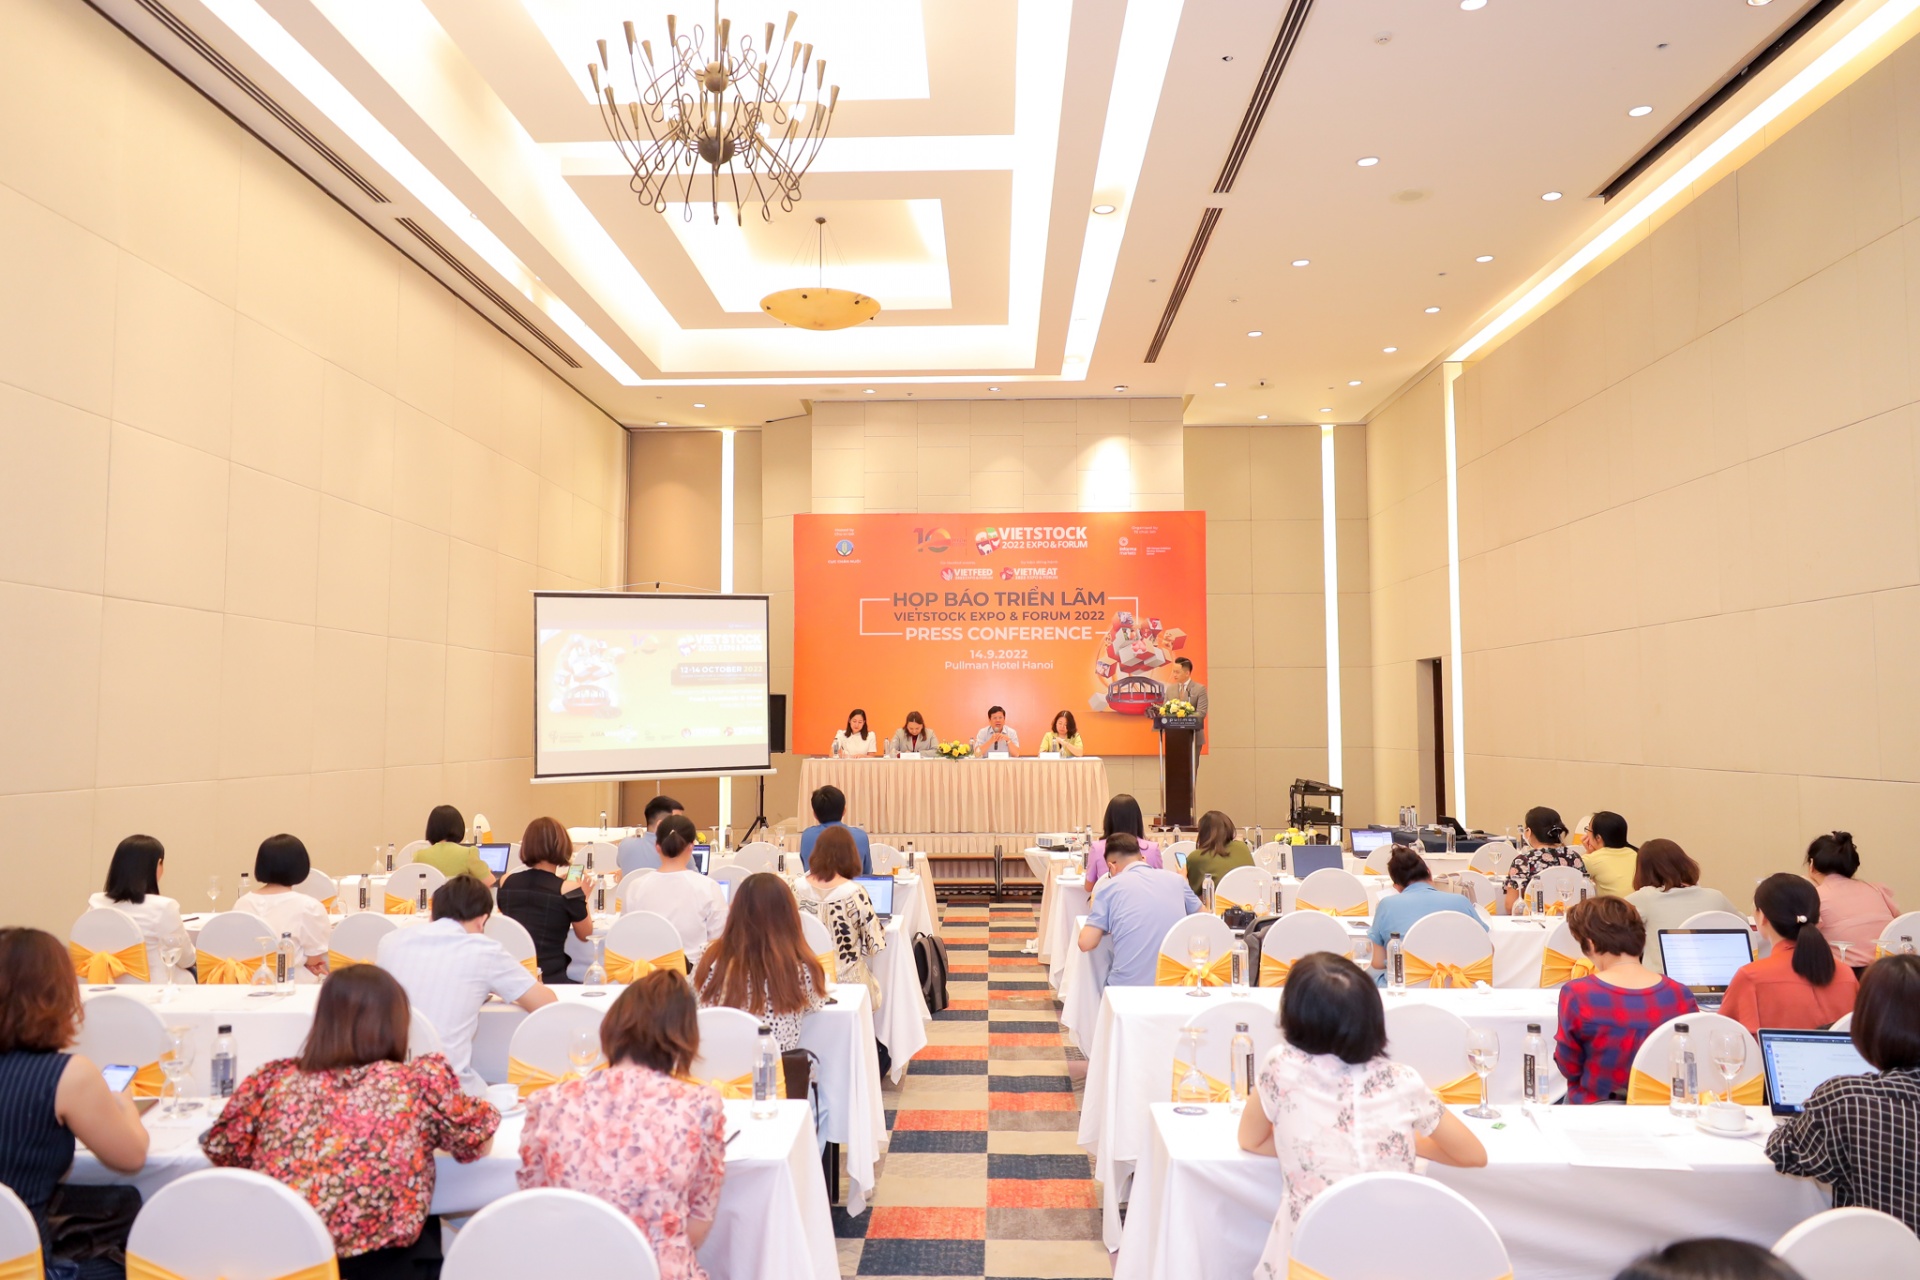 Vietstock Expo & Forum 2022 is back in Ho Chi Minh City this October